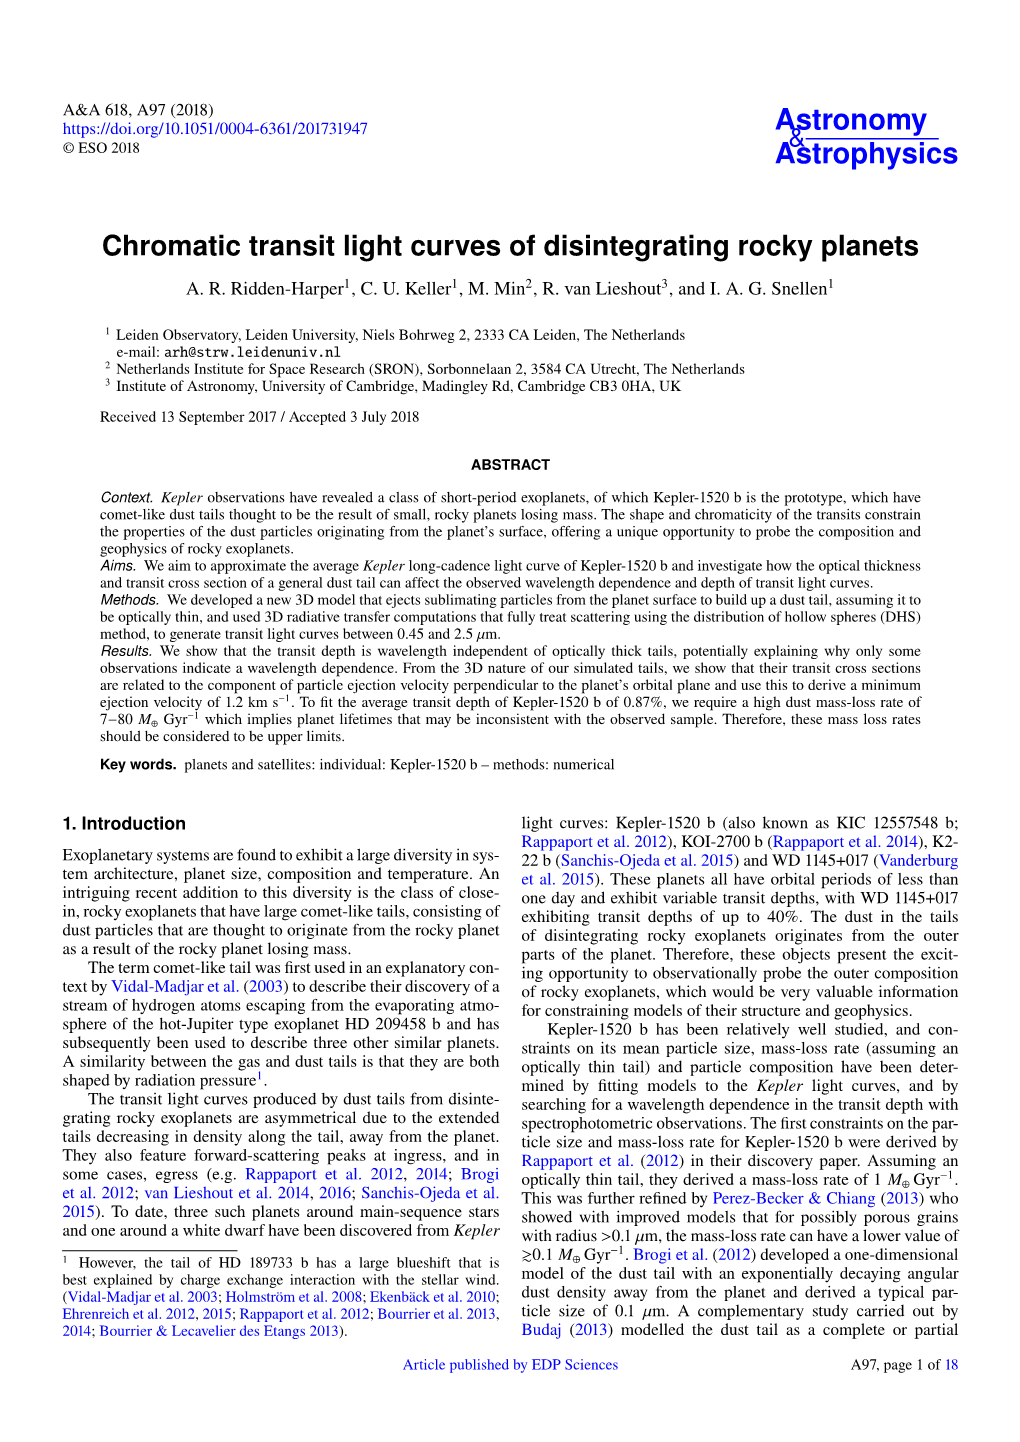 Chromatic Transit Light Curves of Disintegrating Rocky Planets A